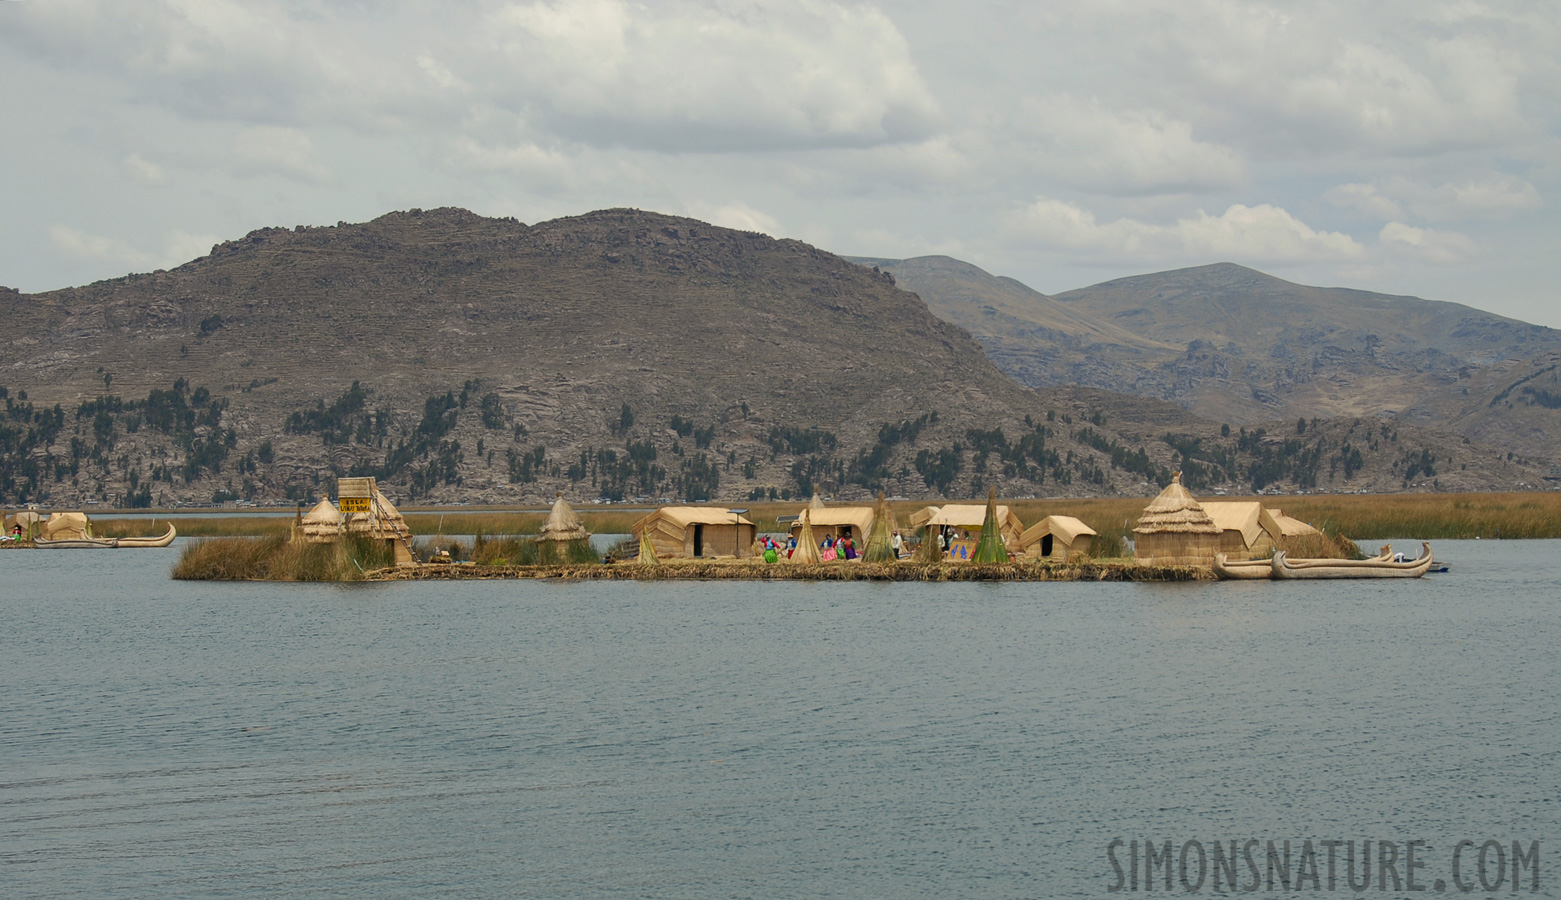 Lake Titicaca [46 mm, 1/320 sec at f / 9.0, ISO 100]